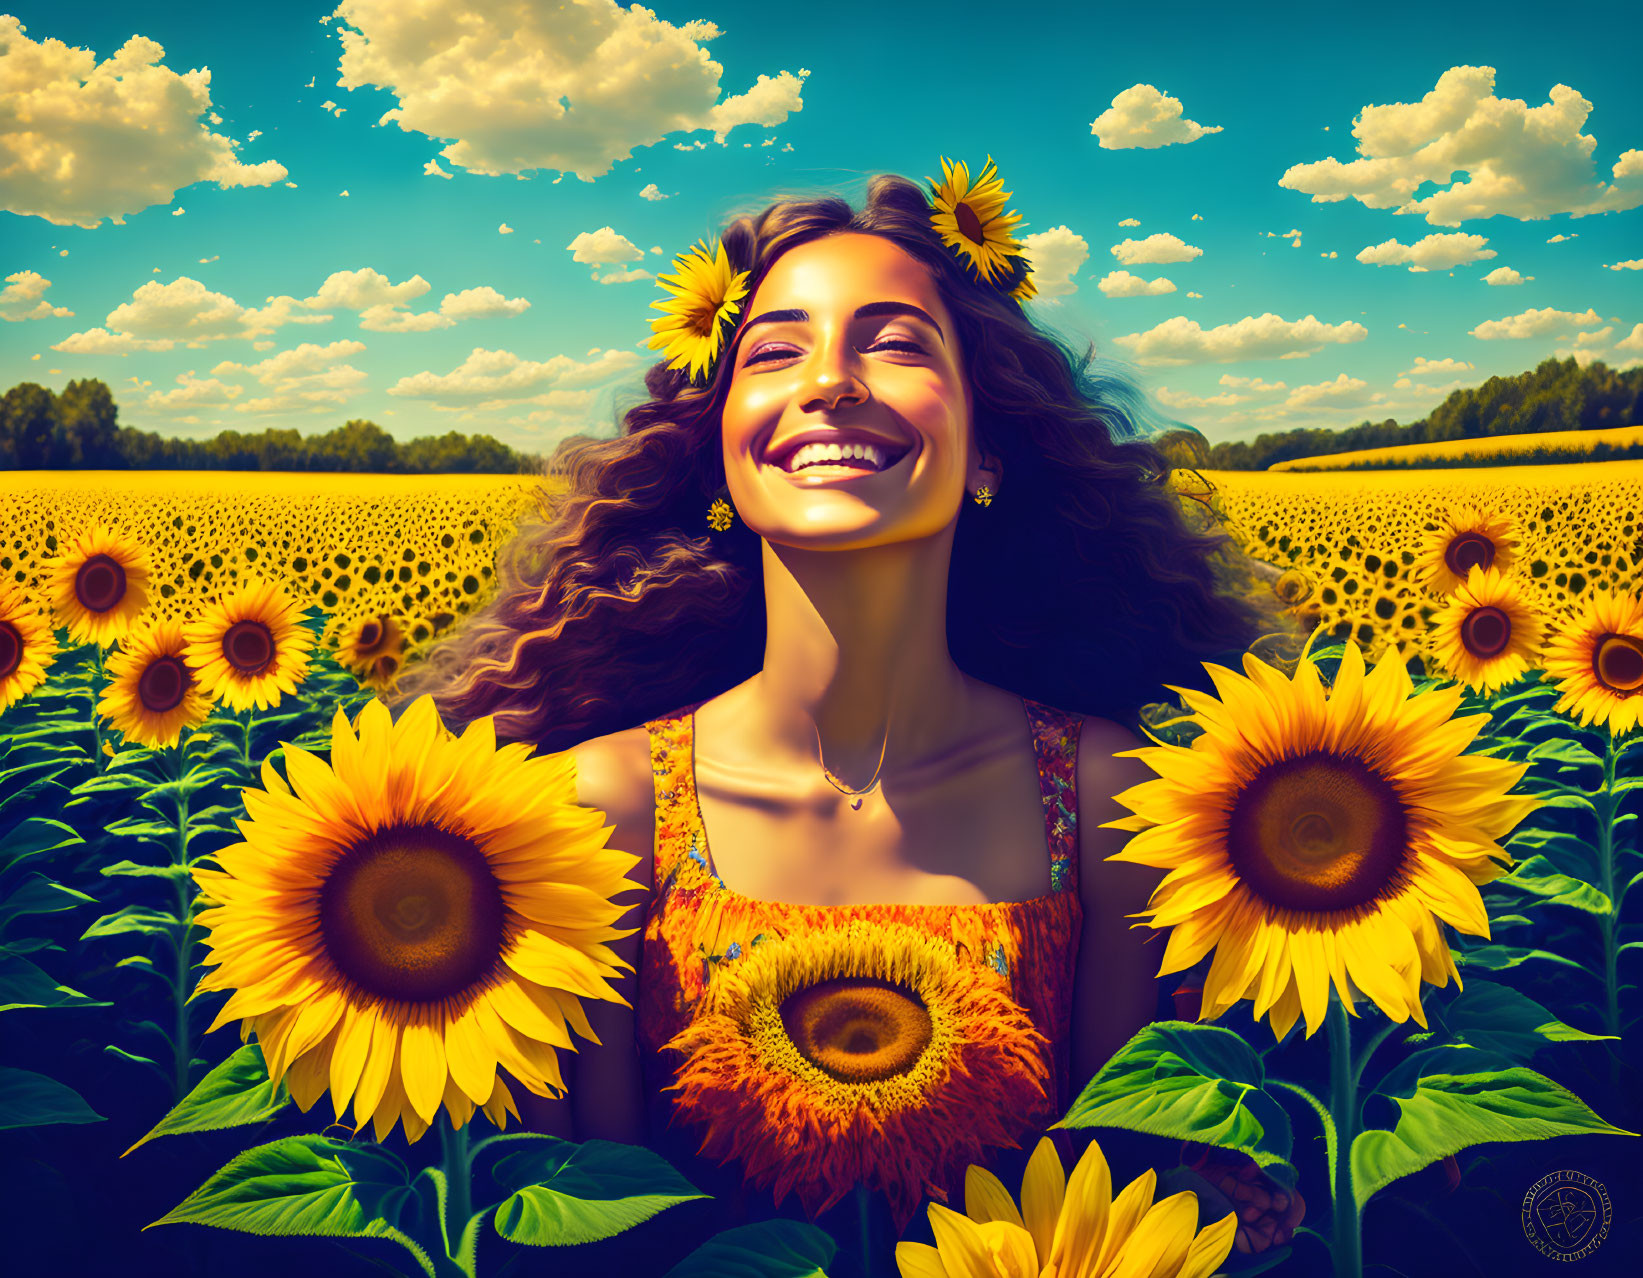 Woman with Sunflowers in Hair Standing in Sunflower Field